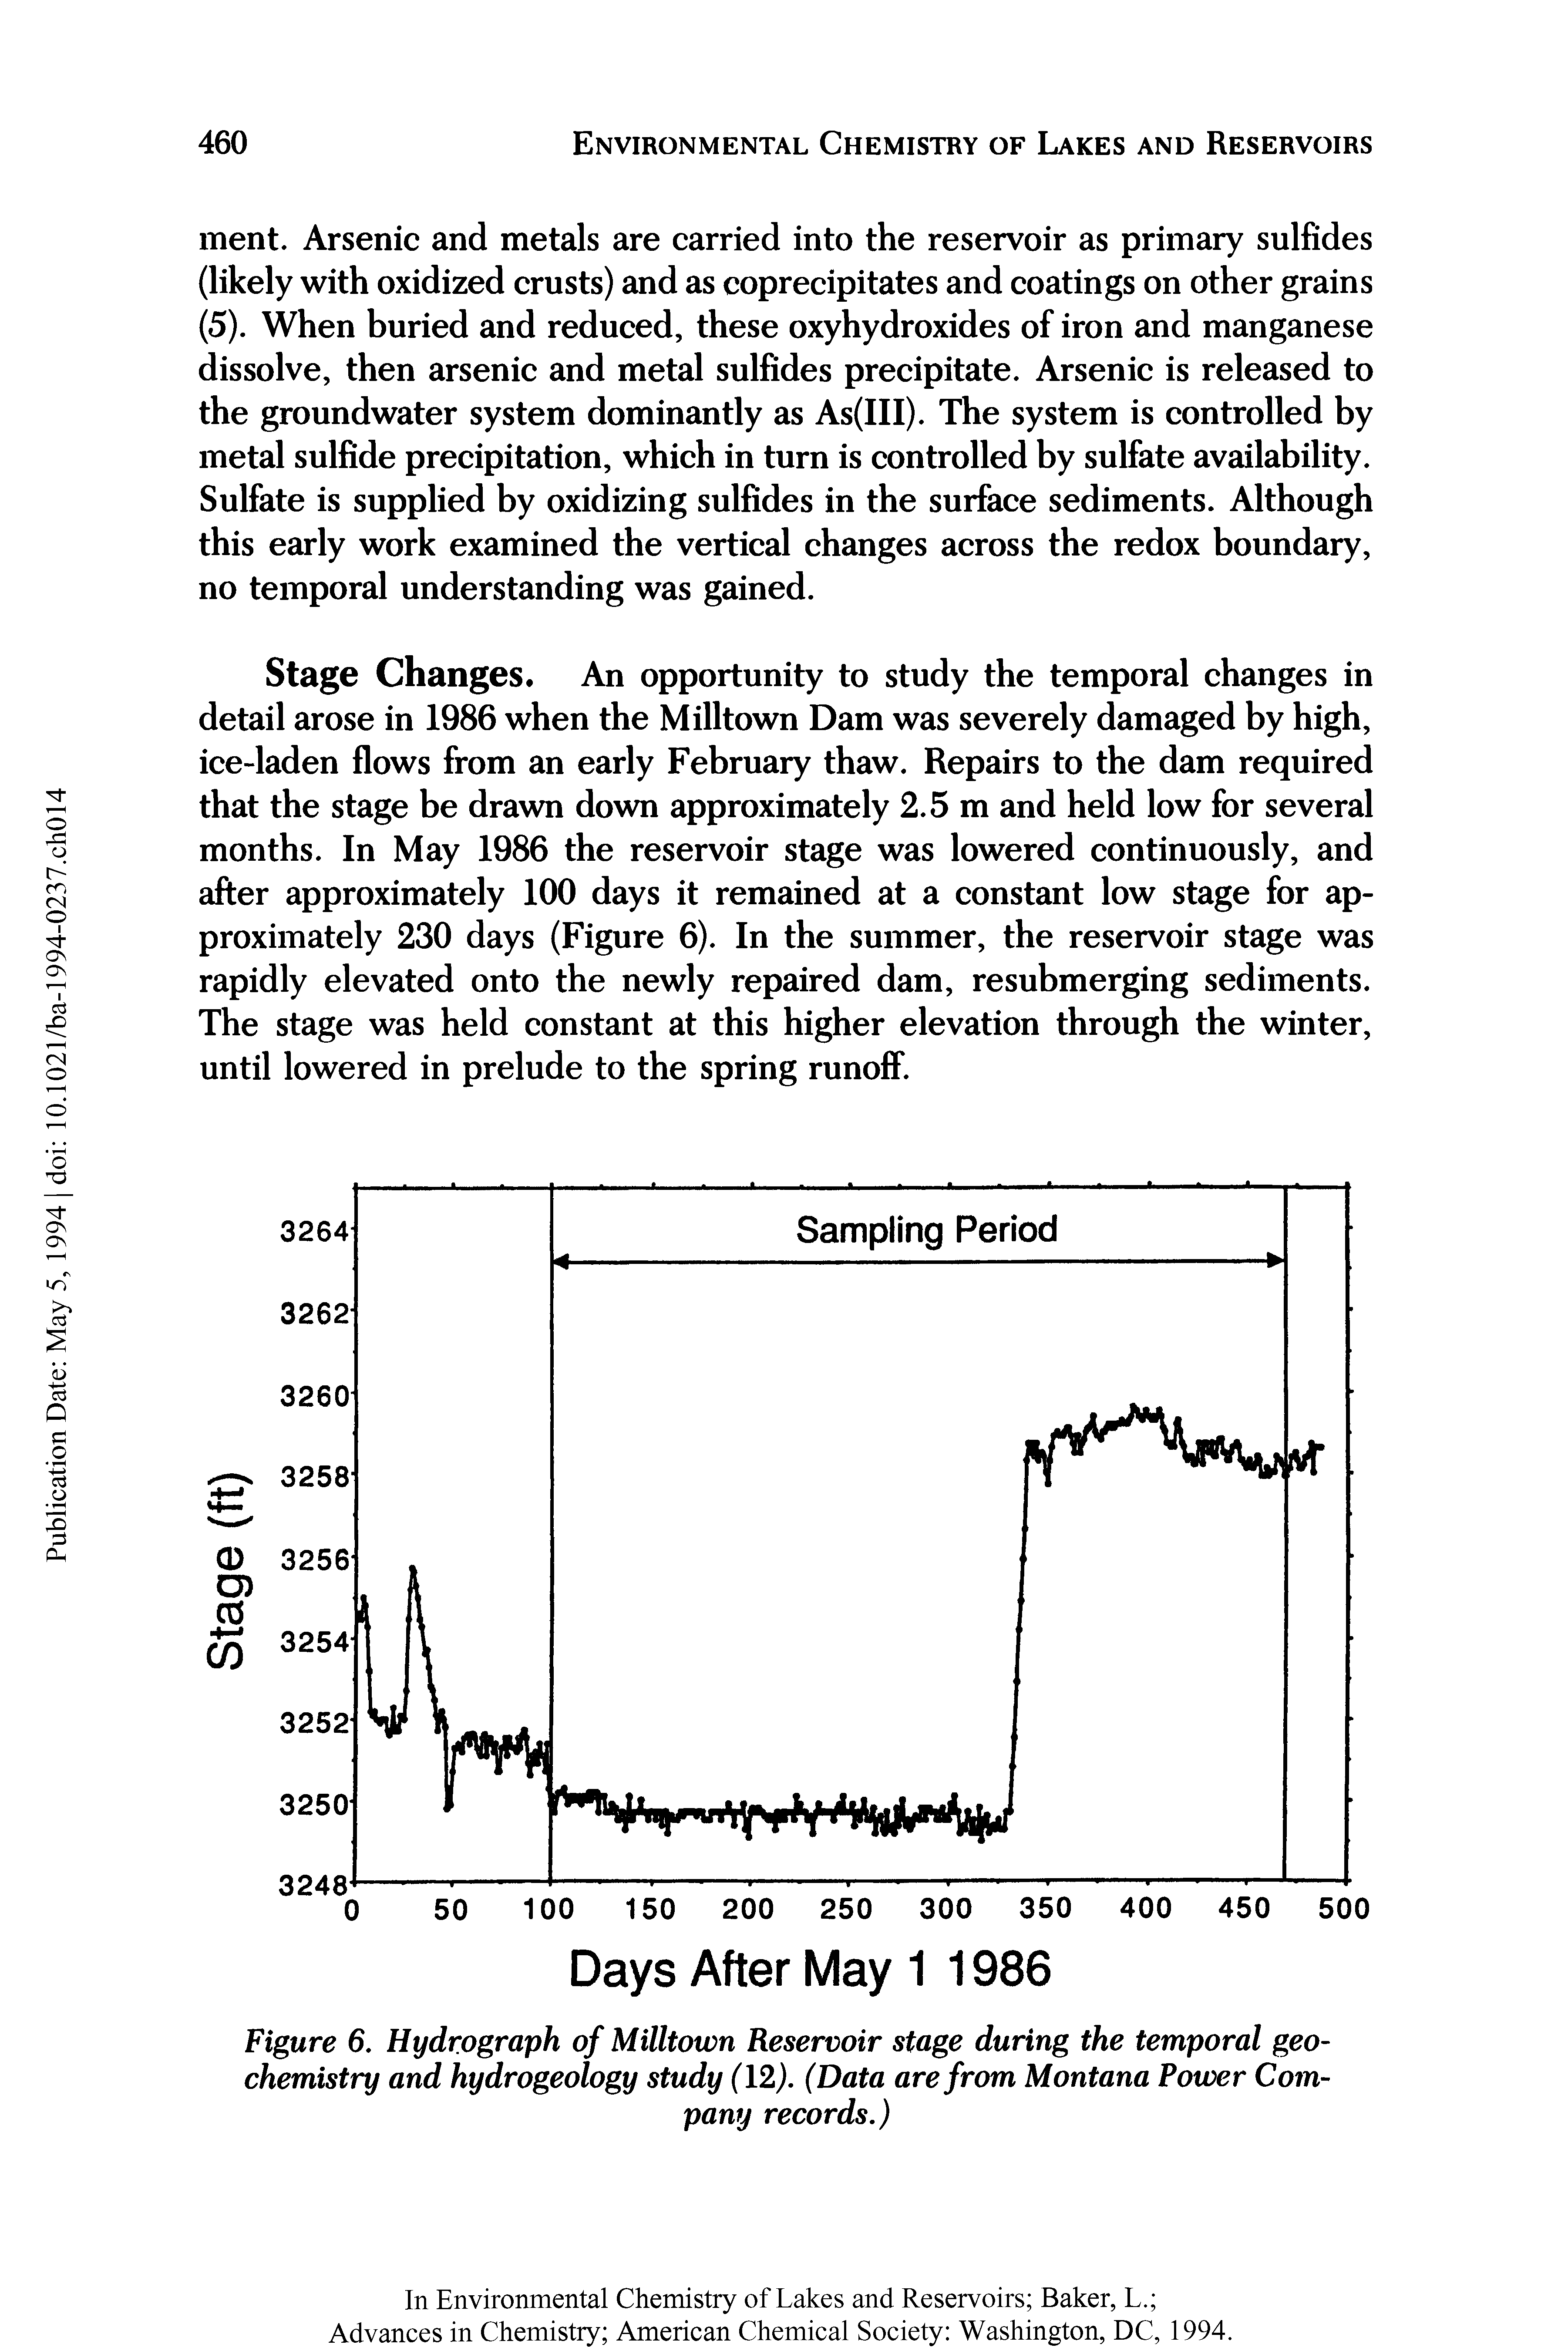 Figure 6. Hydrograph of Milltown Reservoir stage during the temporal geochemistry and hydrogeology study (12). (Data are from Montana Power Company records.)...